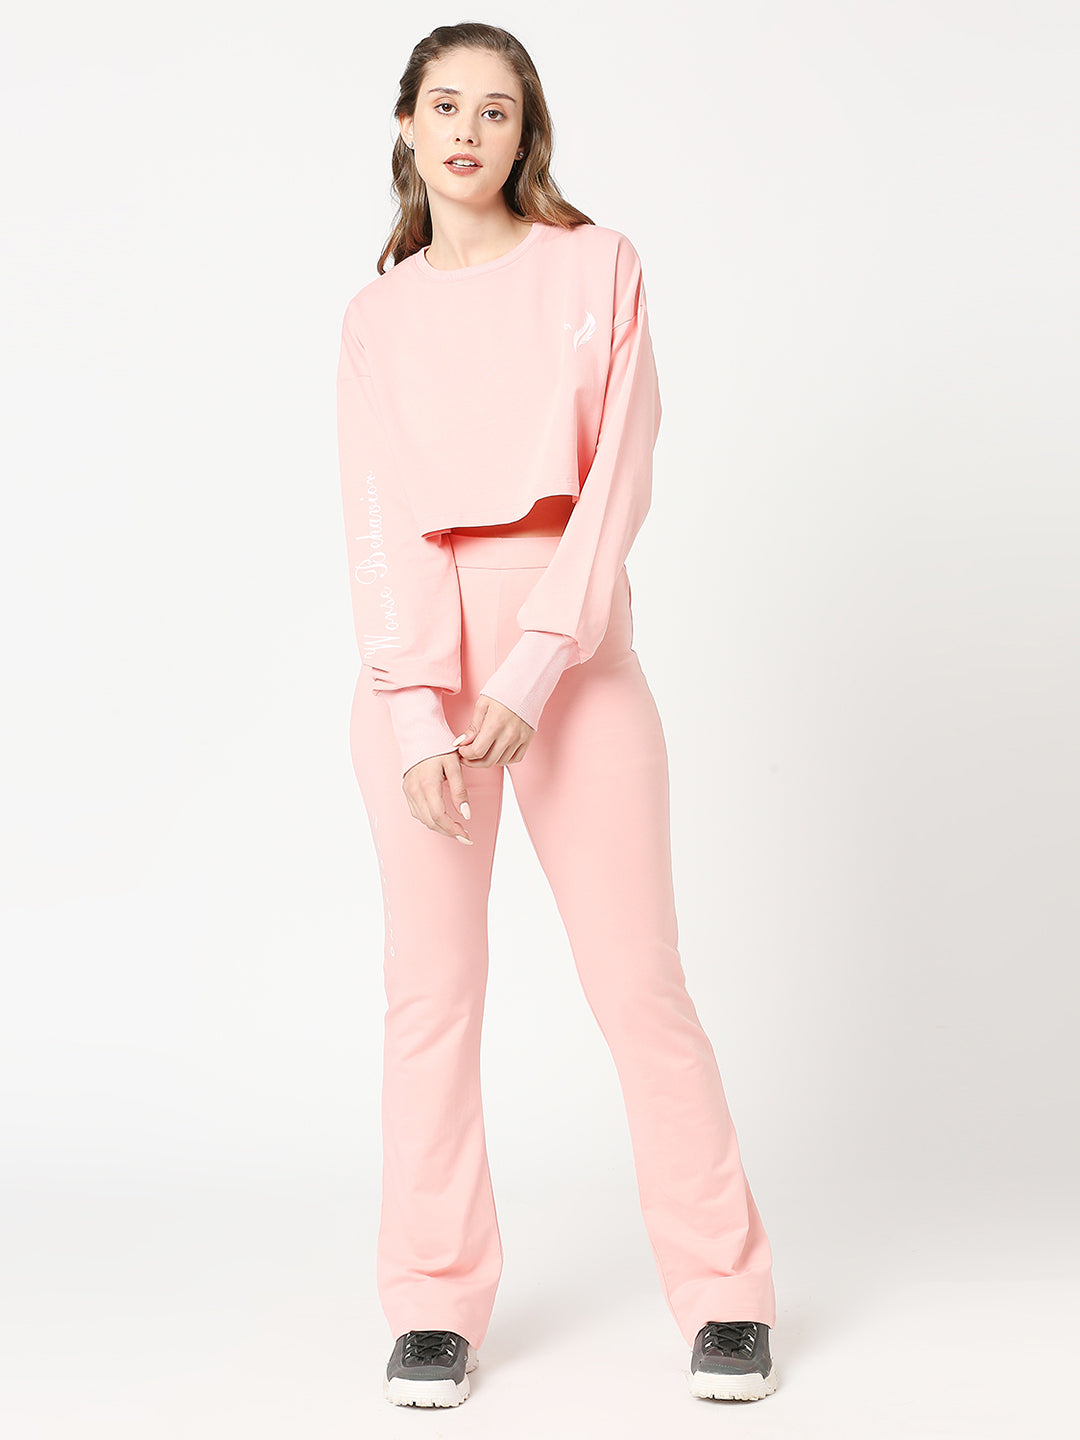 Pink cropped top and full pants set Co-Ords Set.